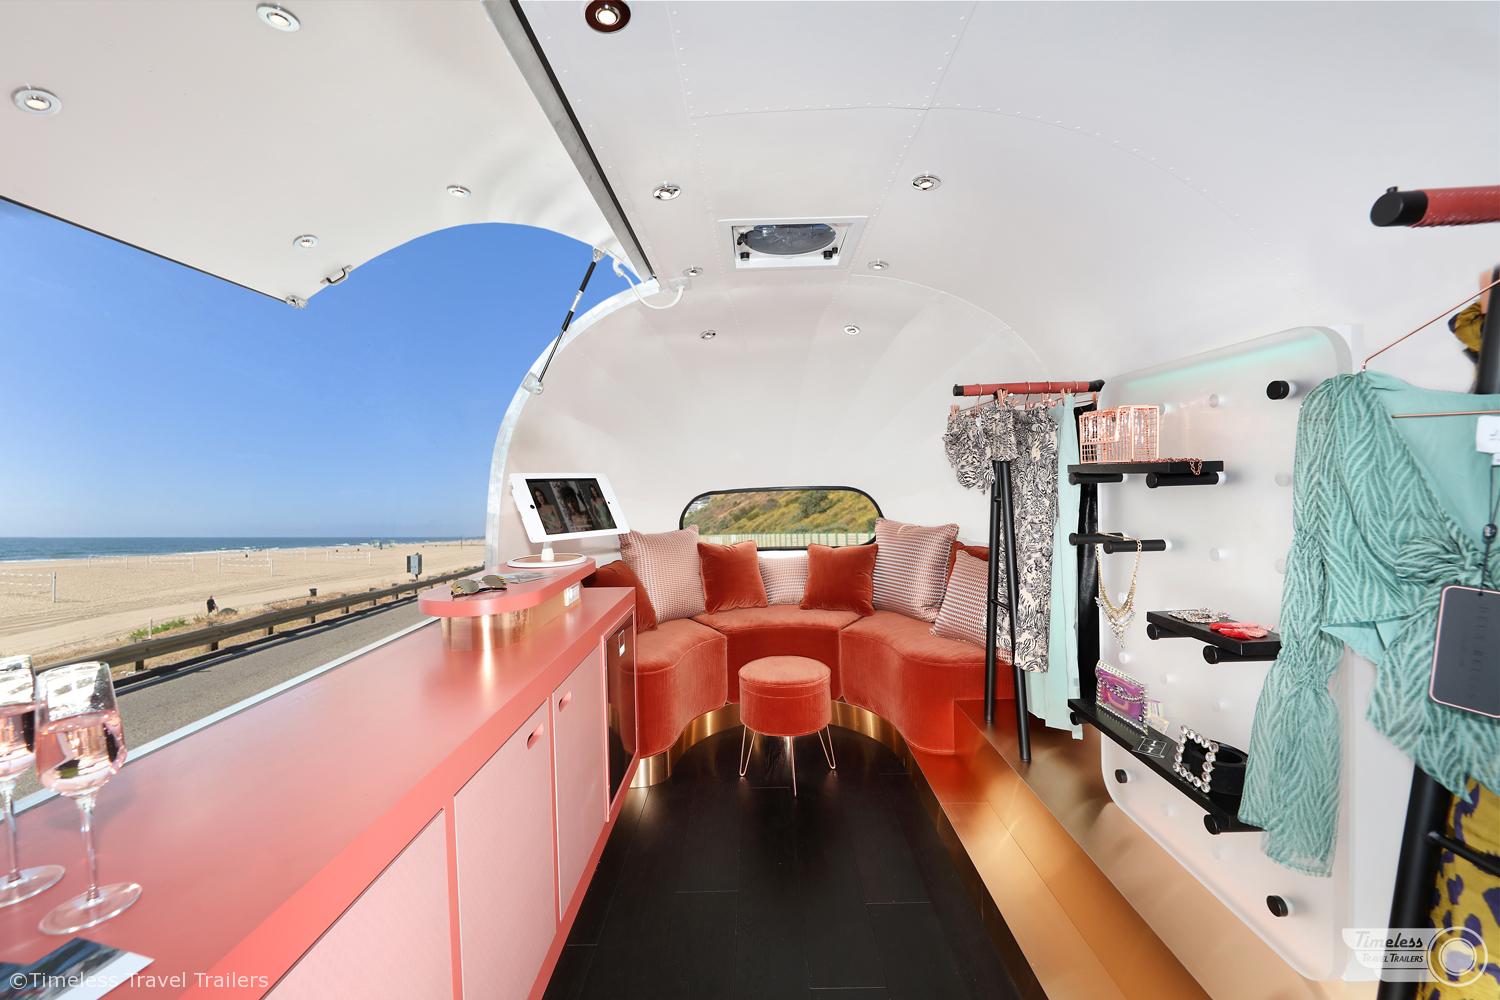 Deux Reines - Mobile Airstream Boutique built by Timeless Travel